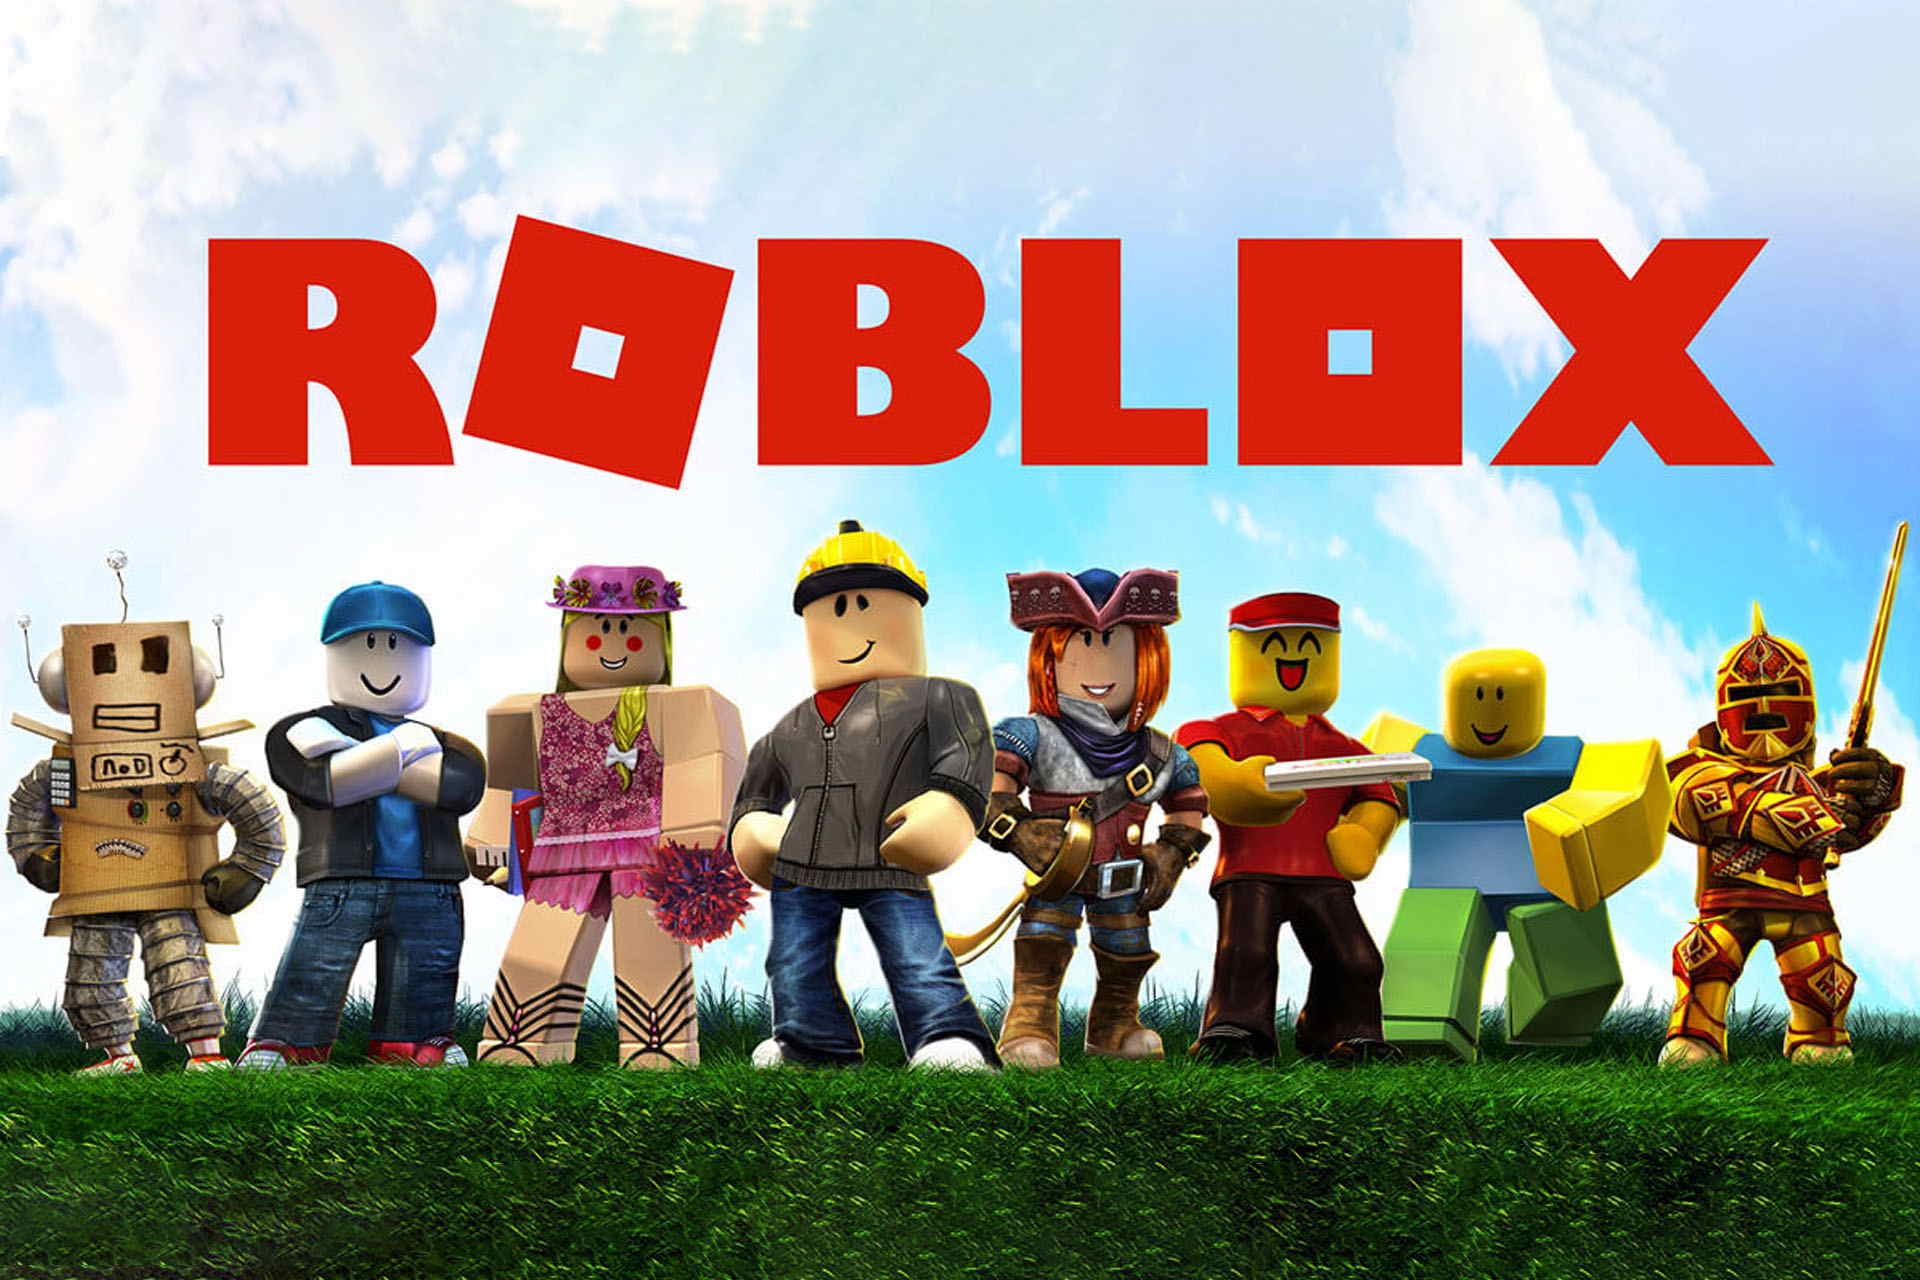 5 Alternative Games Like Roblox To Play Online - play games like roblox